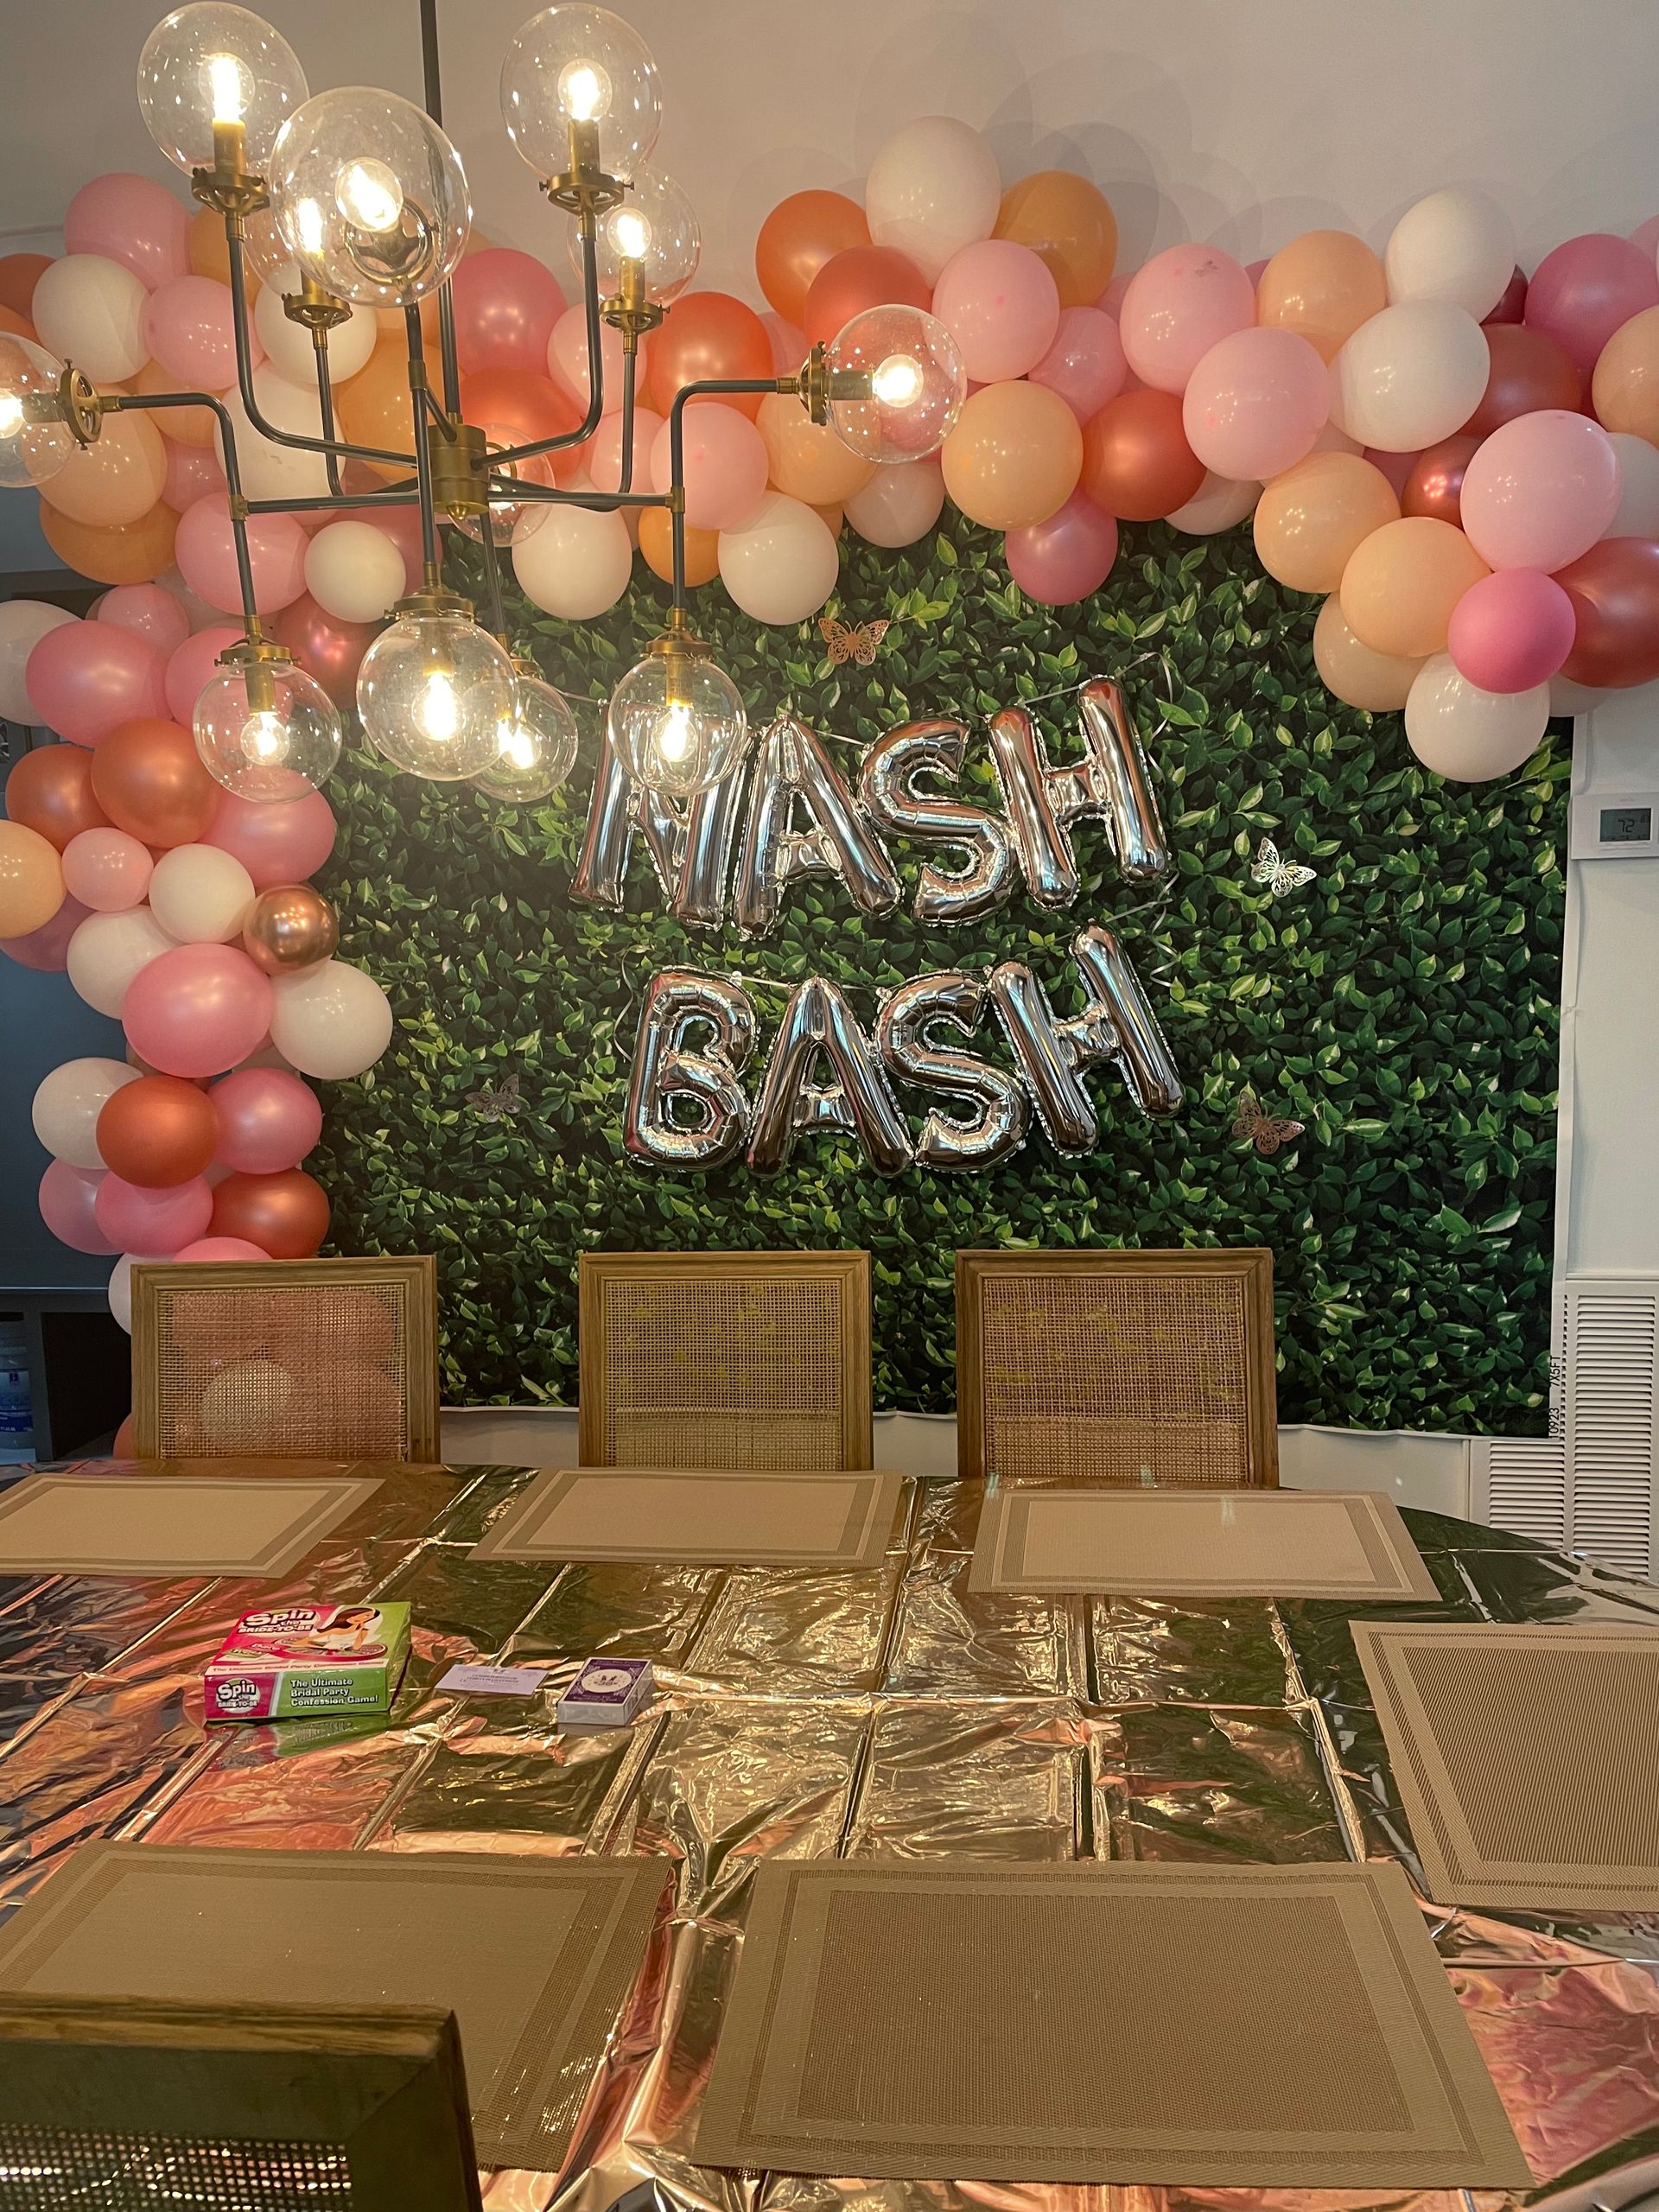 Party Decorating at Your Party: Wall Backdrop, Balloon Garlands, Bedroom  Suite, Banners, Champagne & Snack Add-Ons